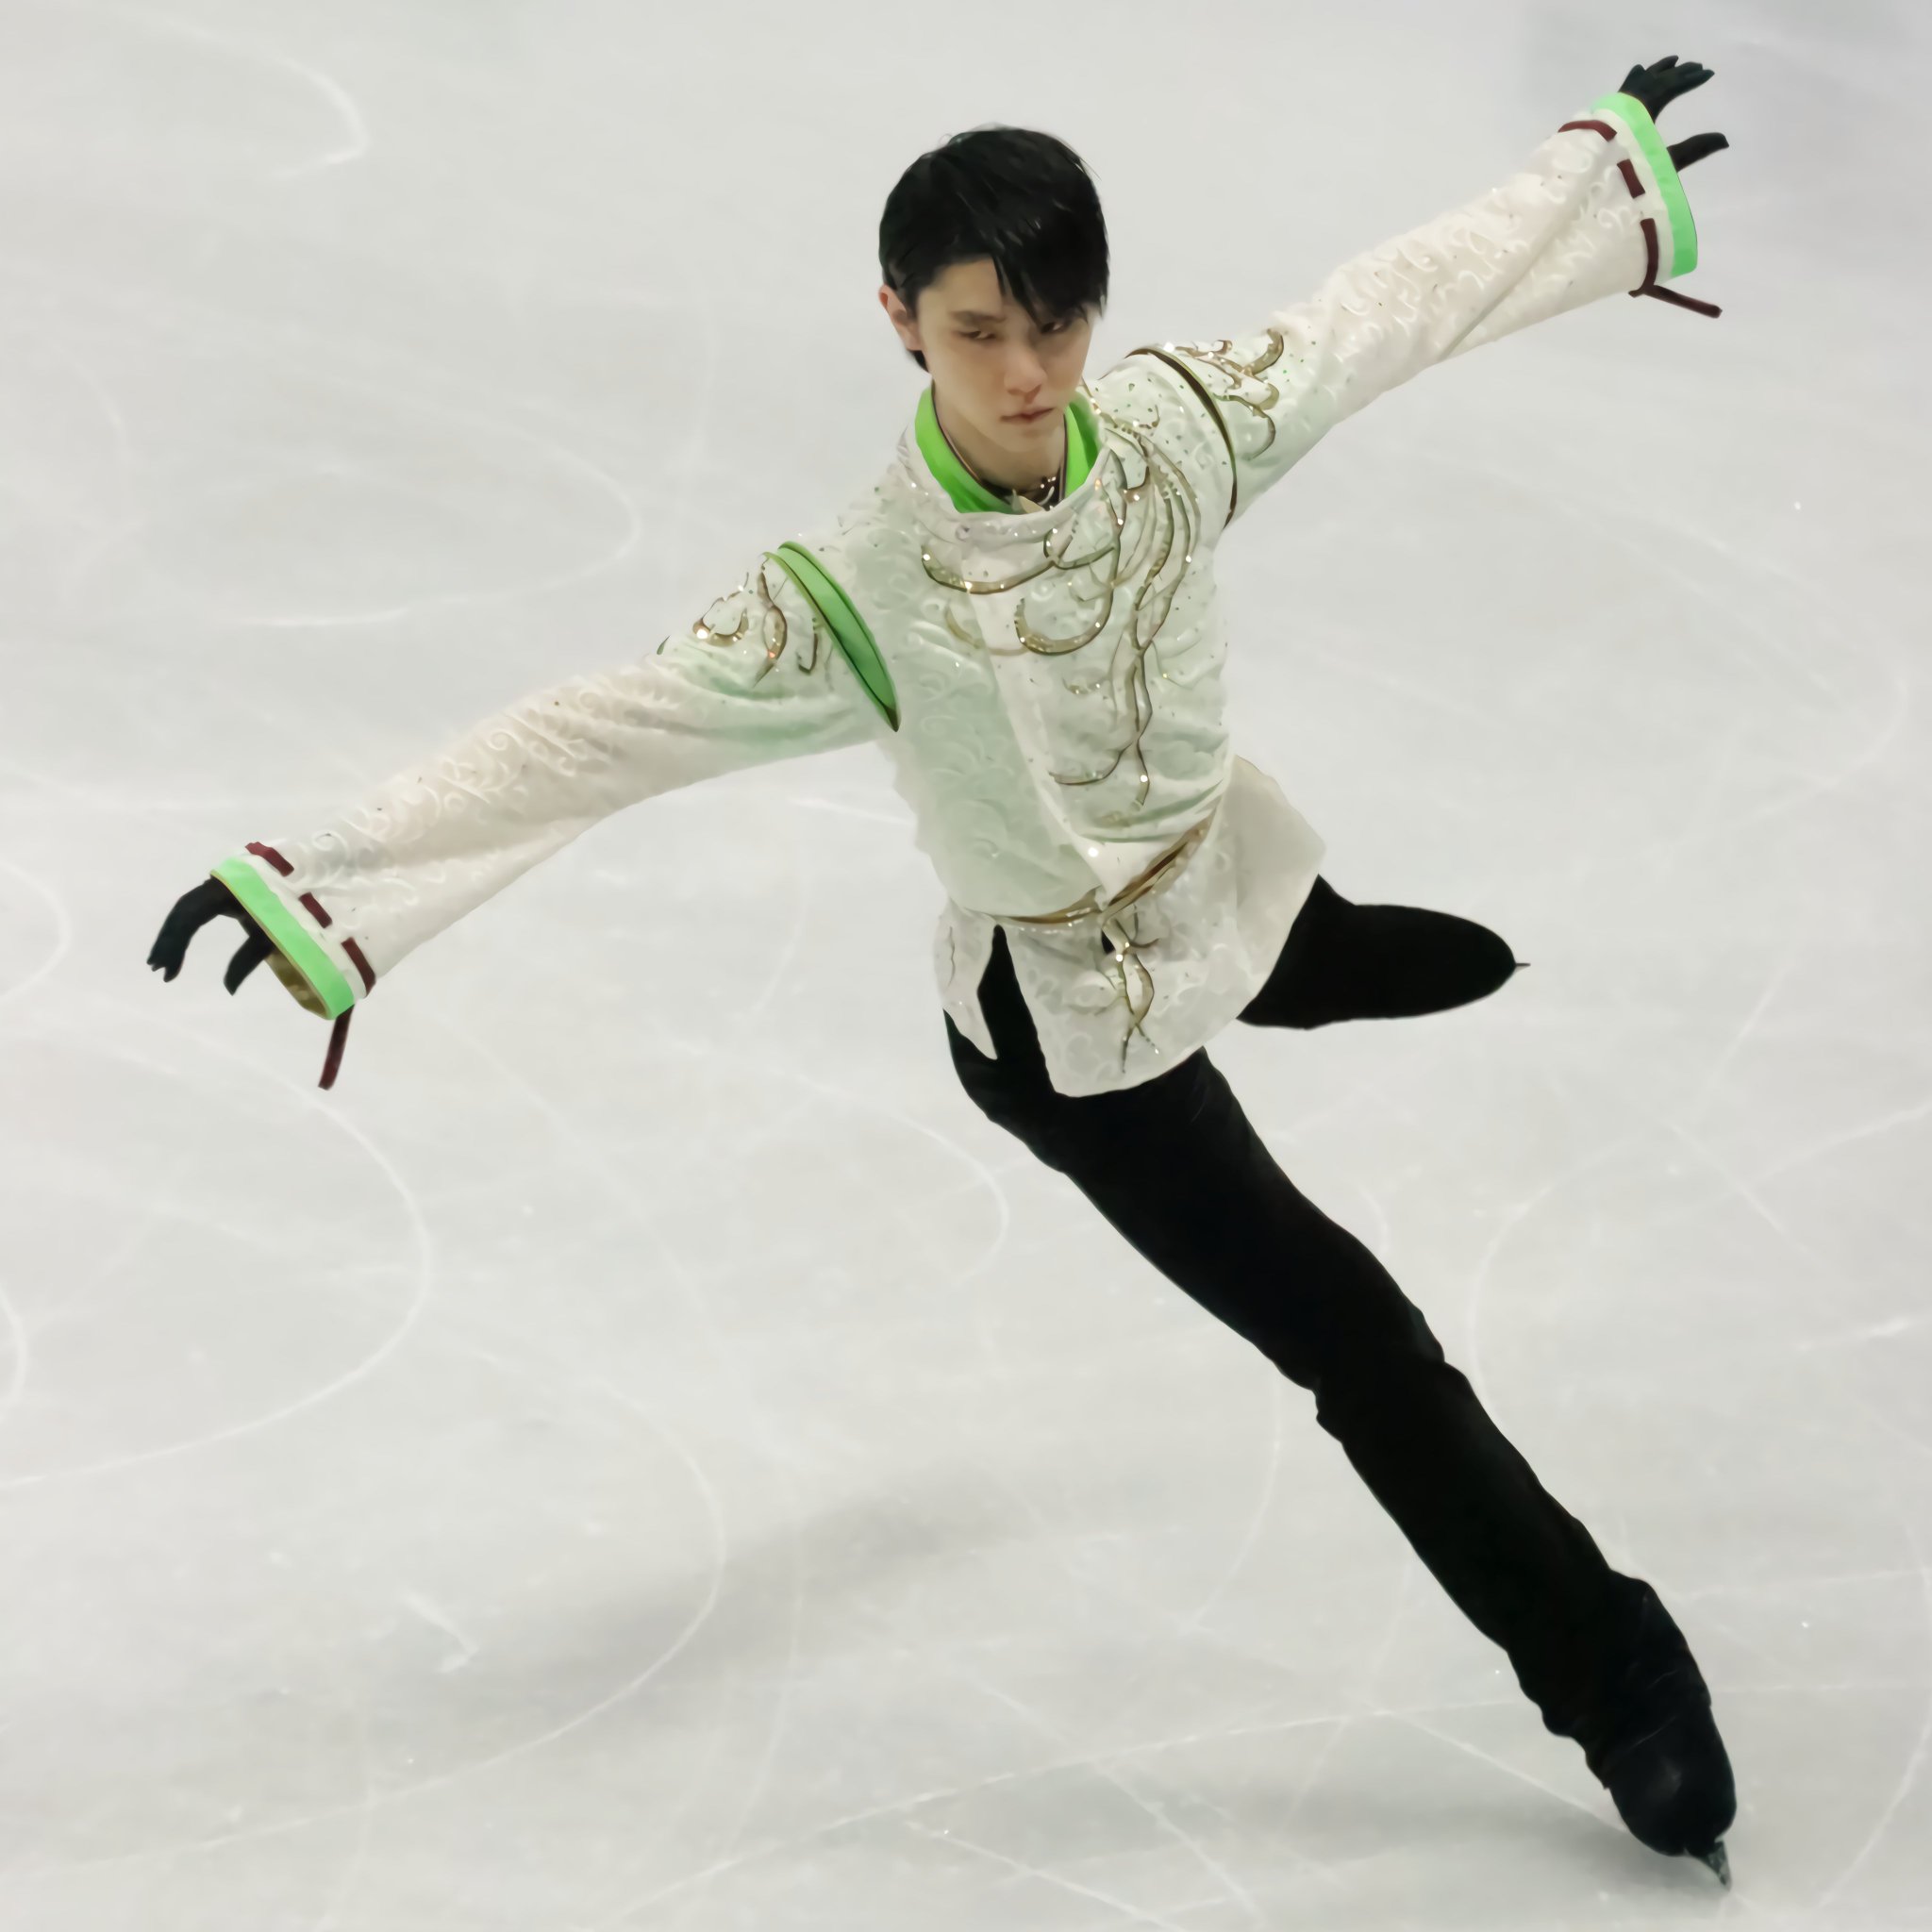 Hanyu in the landing position after a jump in his free skate program Seimei at the 2020 Four Continents Championships in Seoul